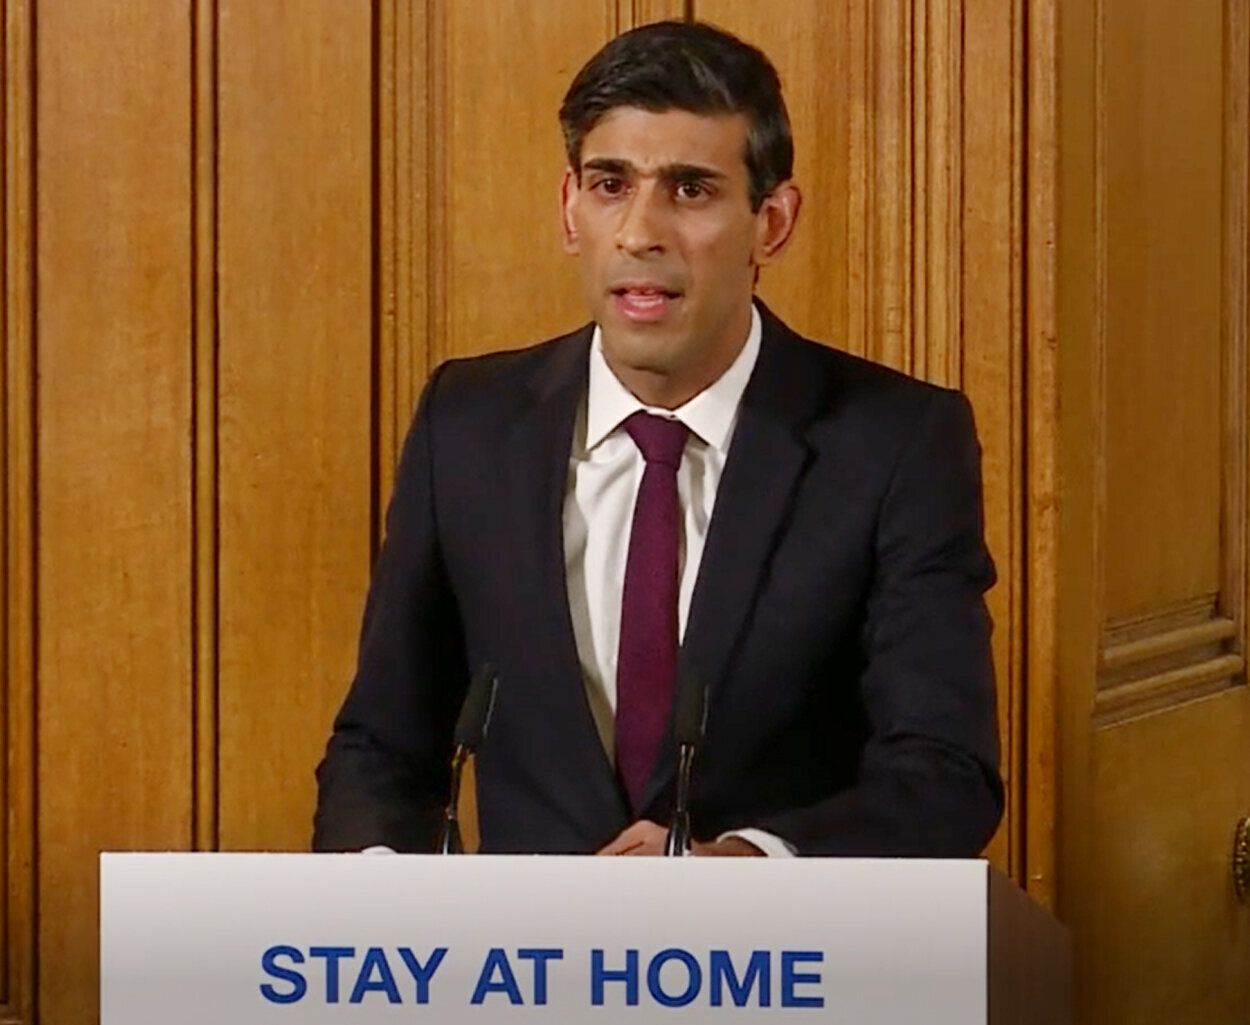 A screen-grab of Chancellor Rishi Sunak speaking at a media briefing in Downing Street, London, on coronavirus (COVID-19).